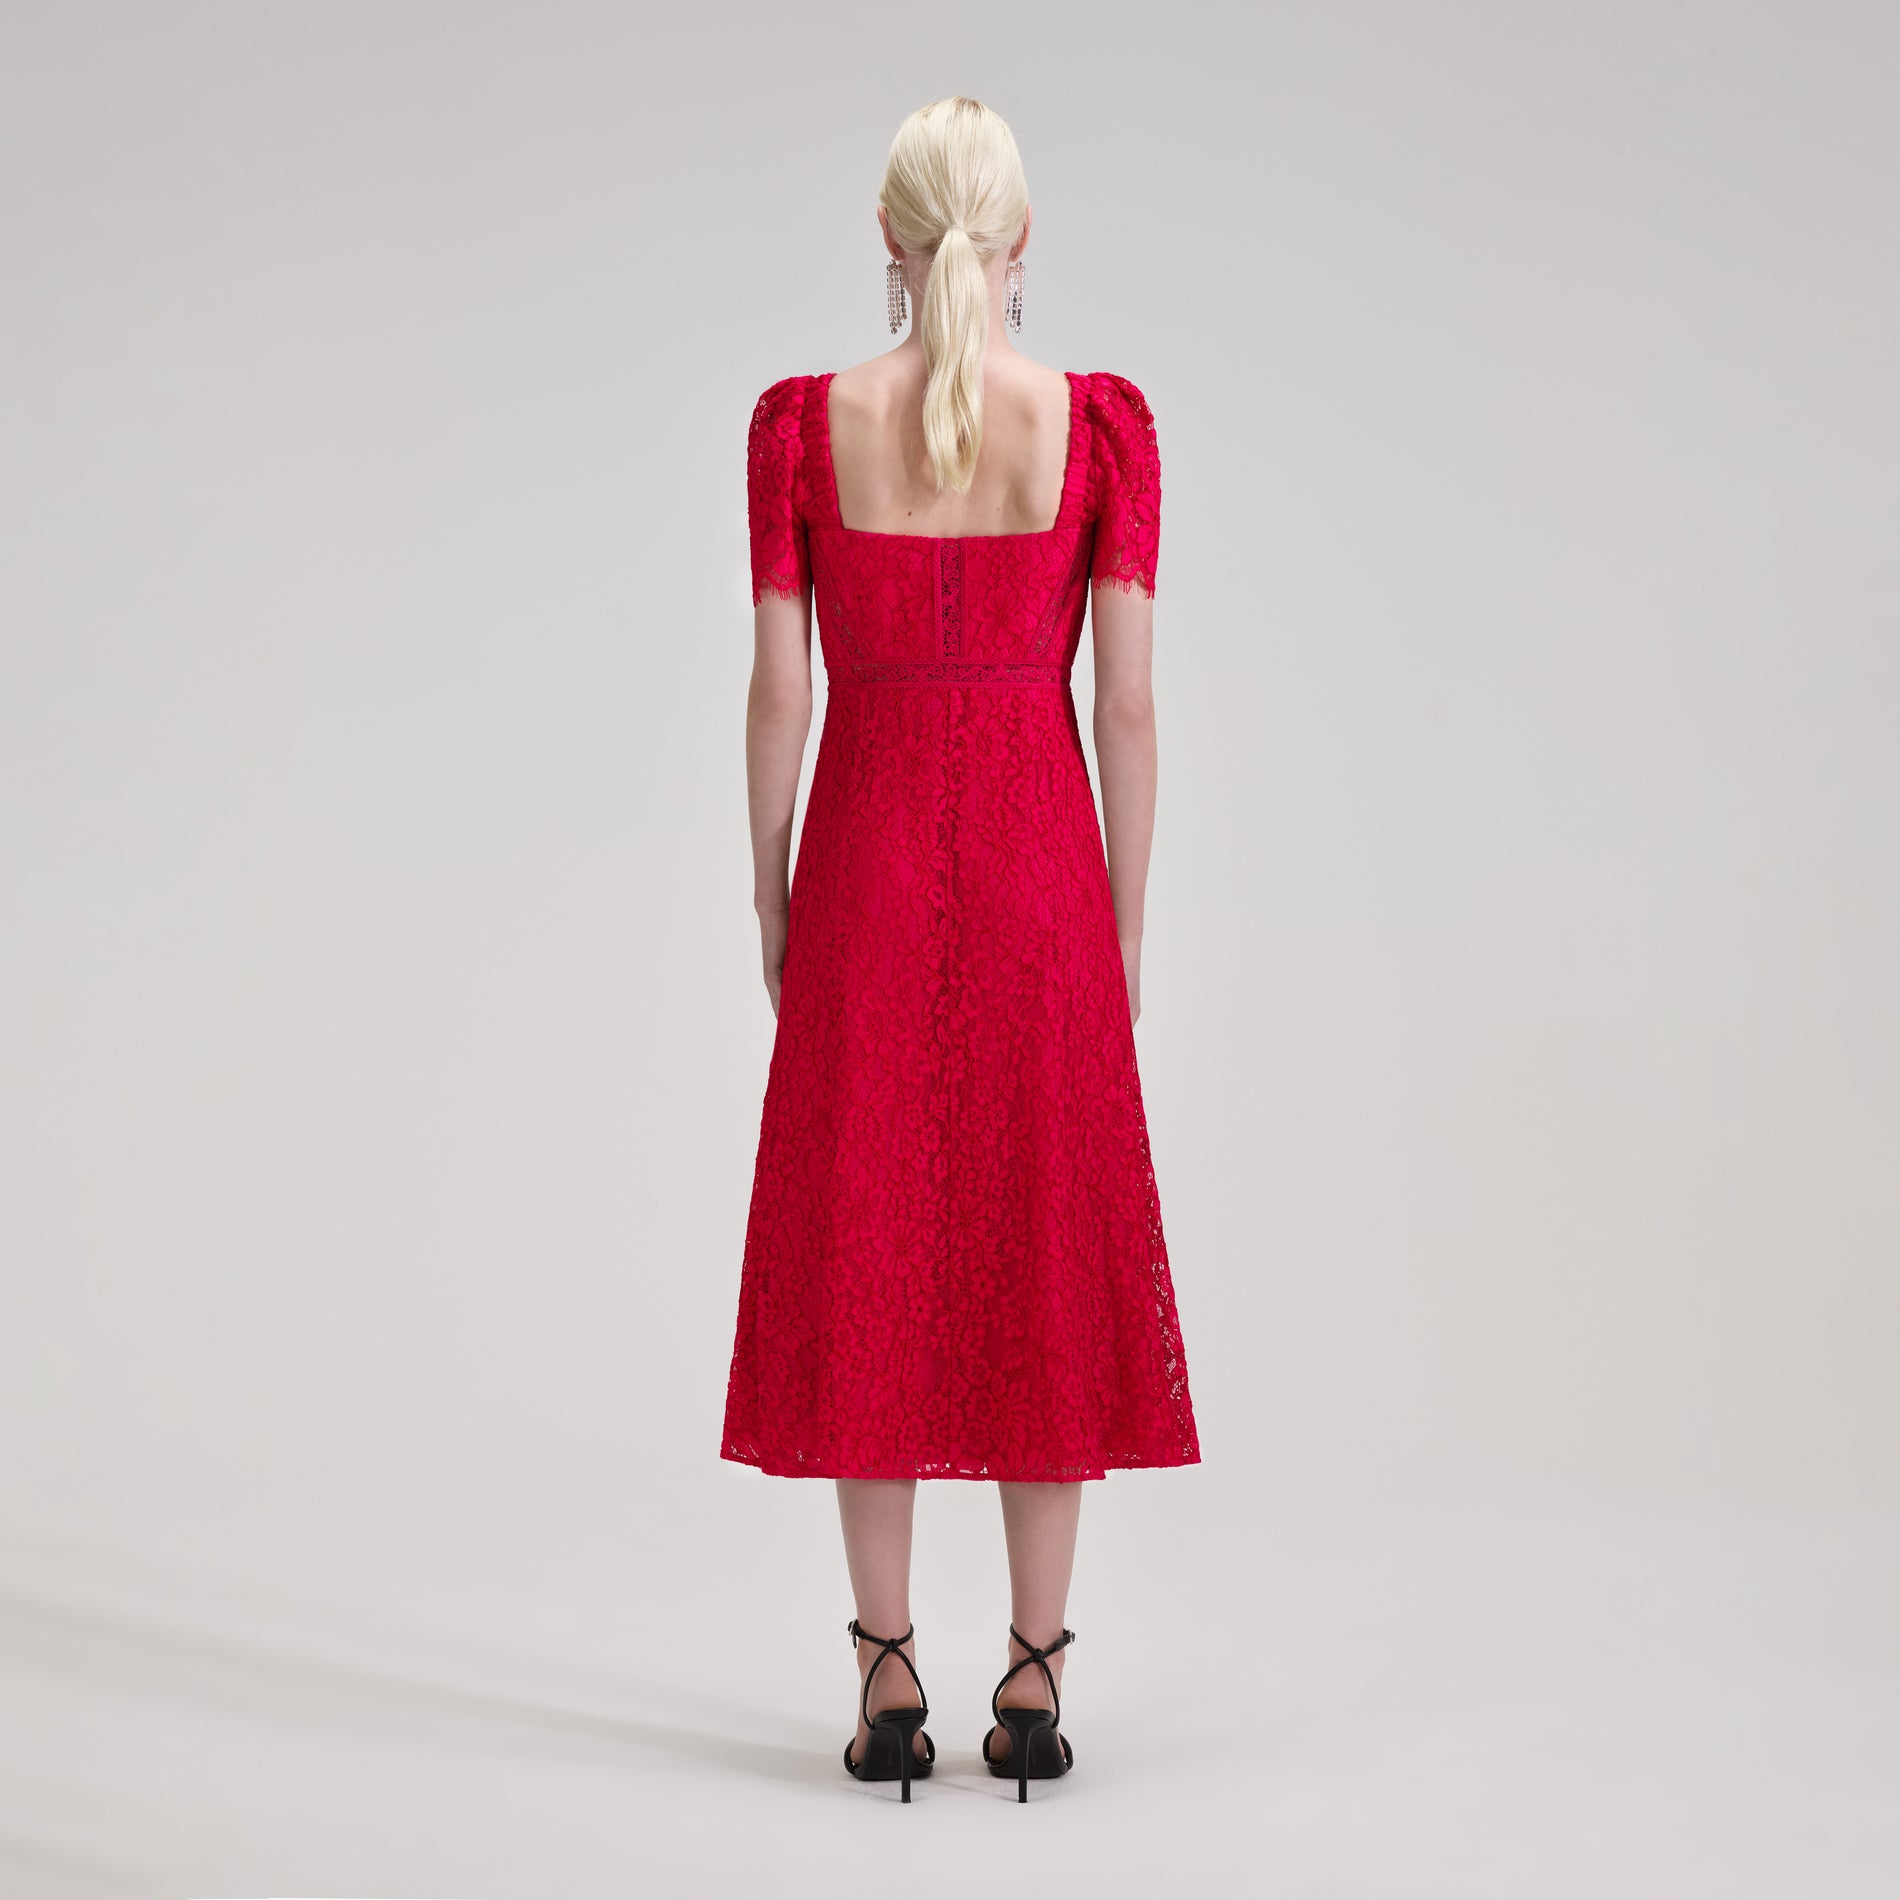 A woman wearing the Red Lace Midi Dress